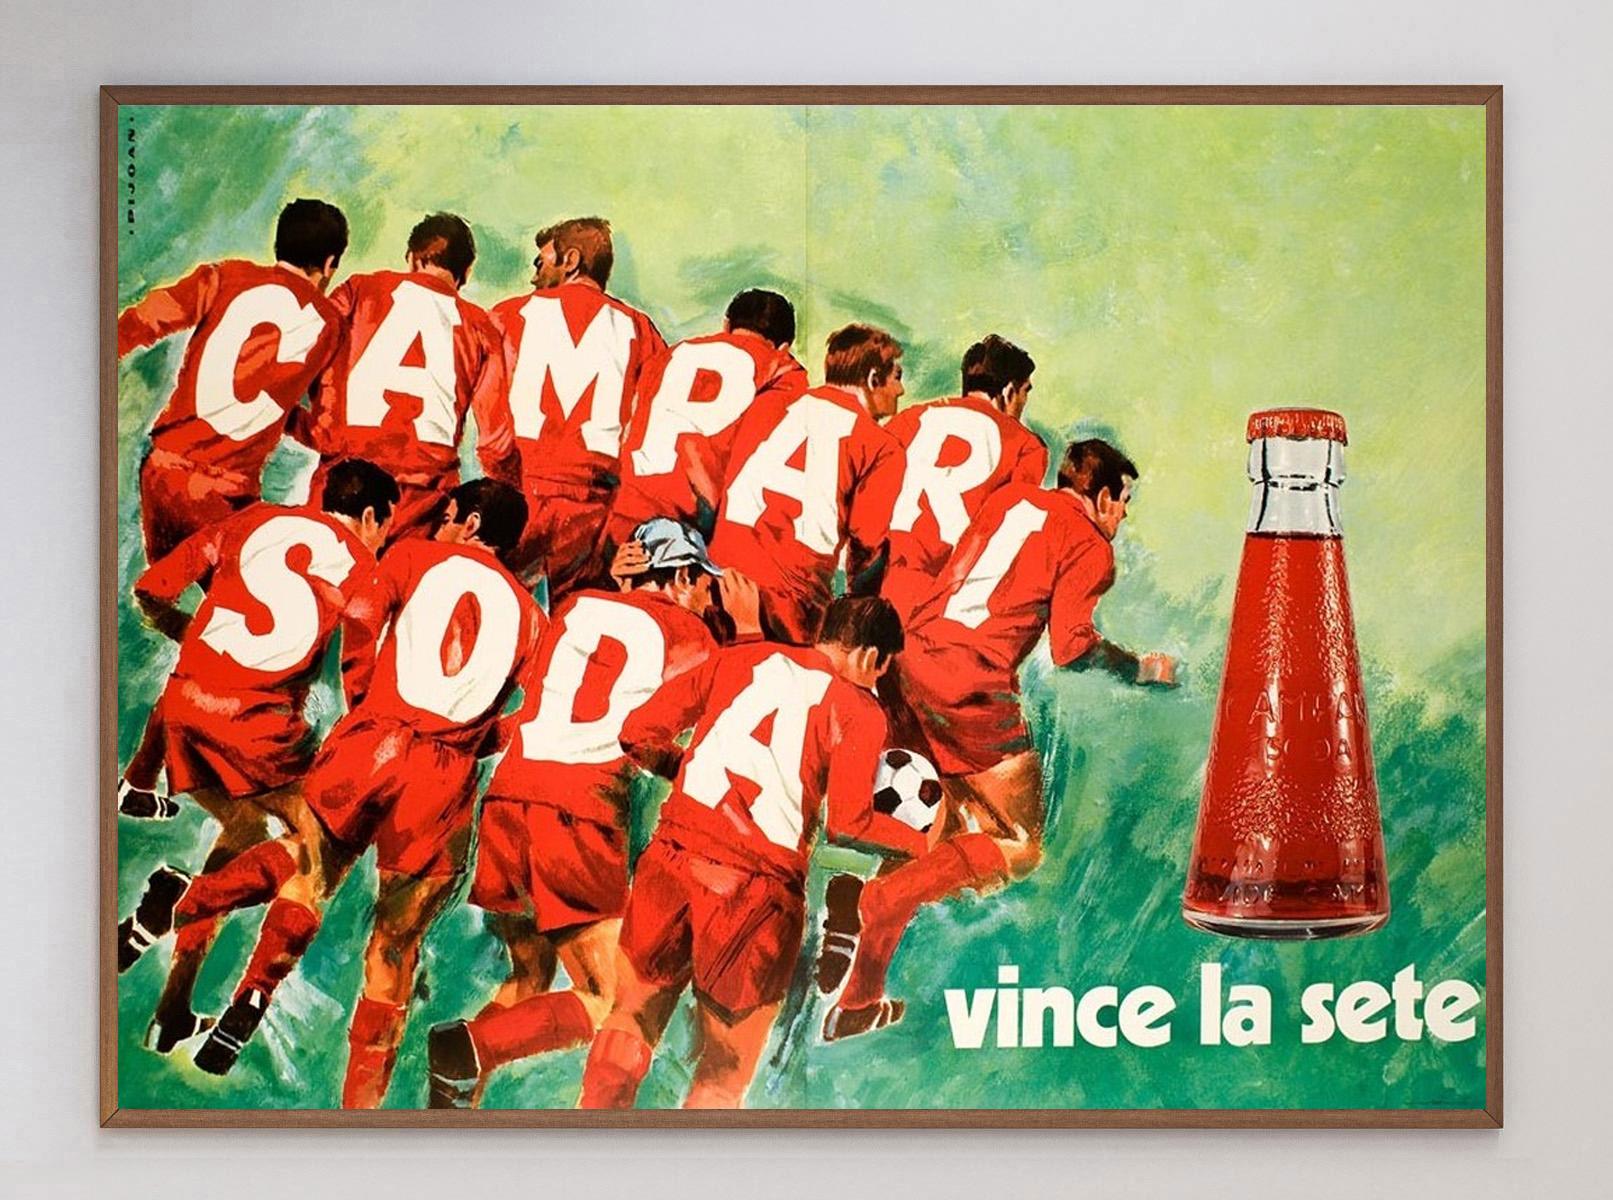 Iconic Italian liqueur brand Campari have hired a number of renowned poster designers to create a number of varied designs across the 20th century, and this piece from 1970 by Pijoan is no different.

Campari was formed in 1860 by Gaspare Campari